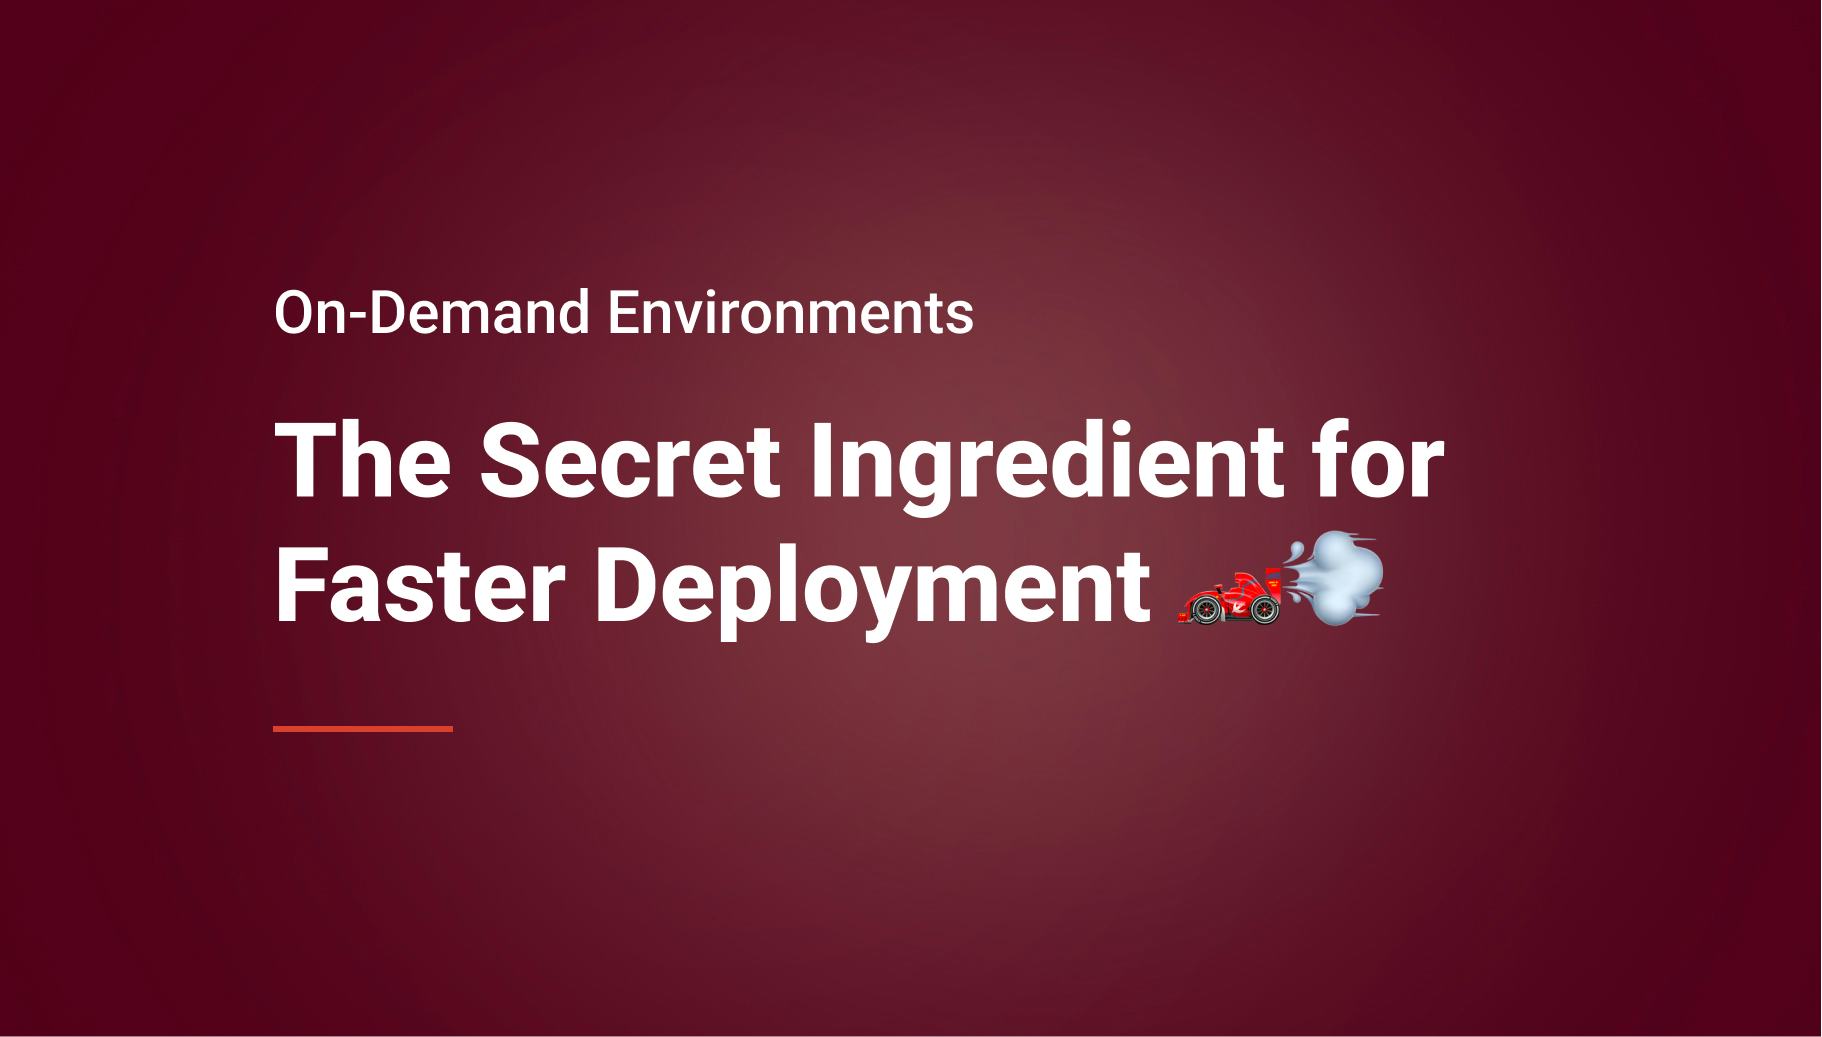 The Secret Ingredient for Faster Deployment: Use On-demand Environments